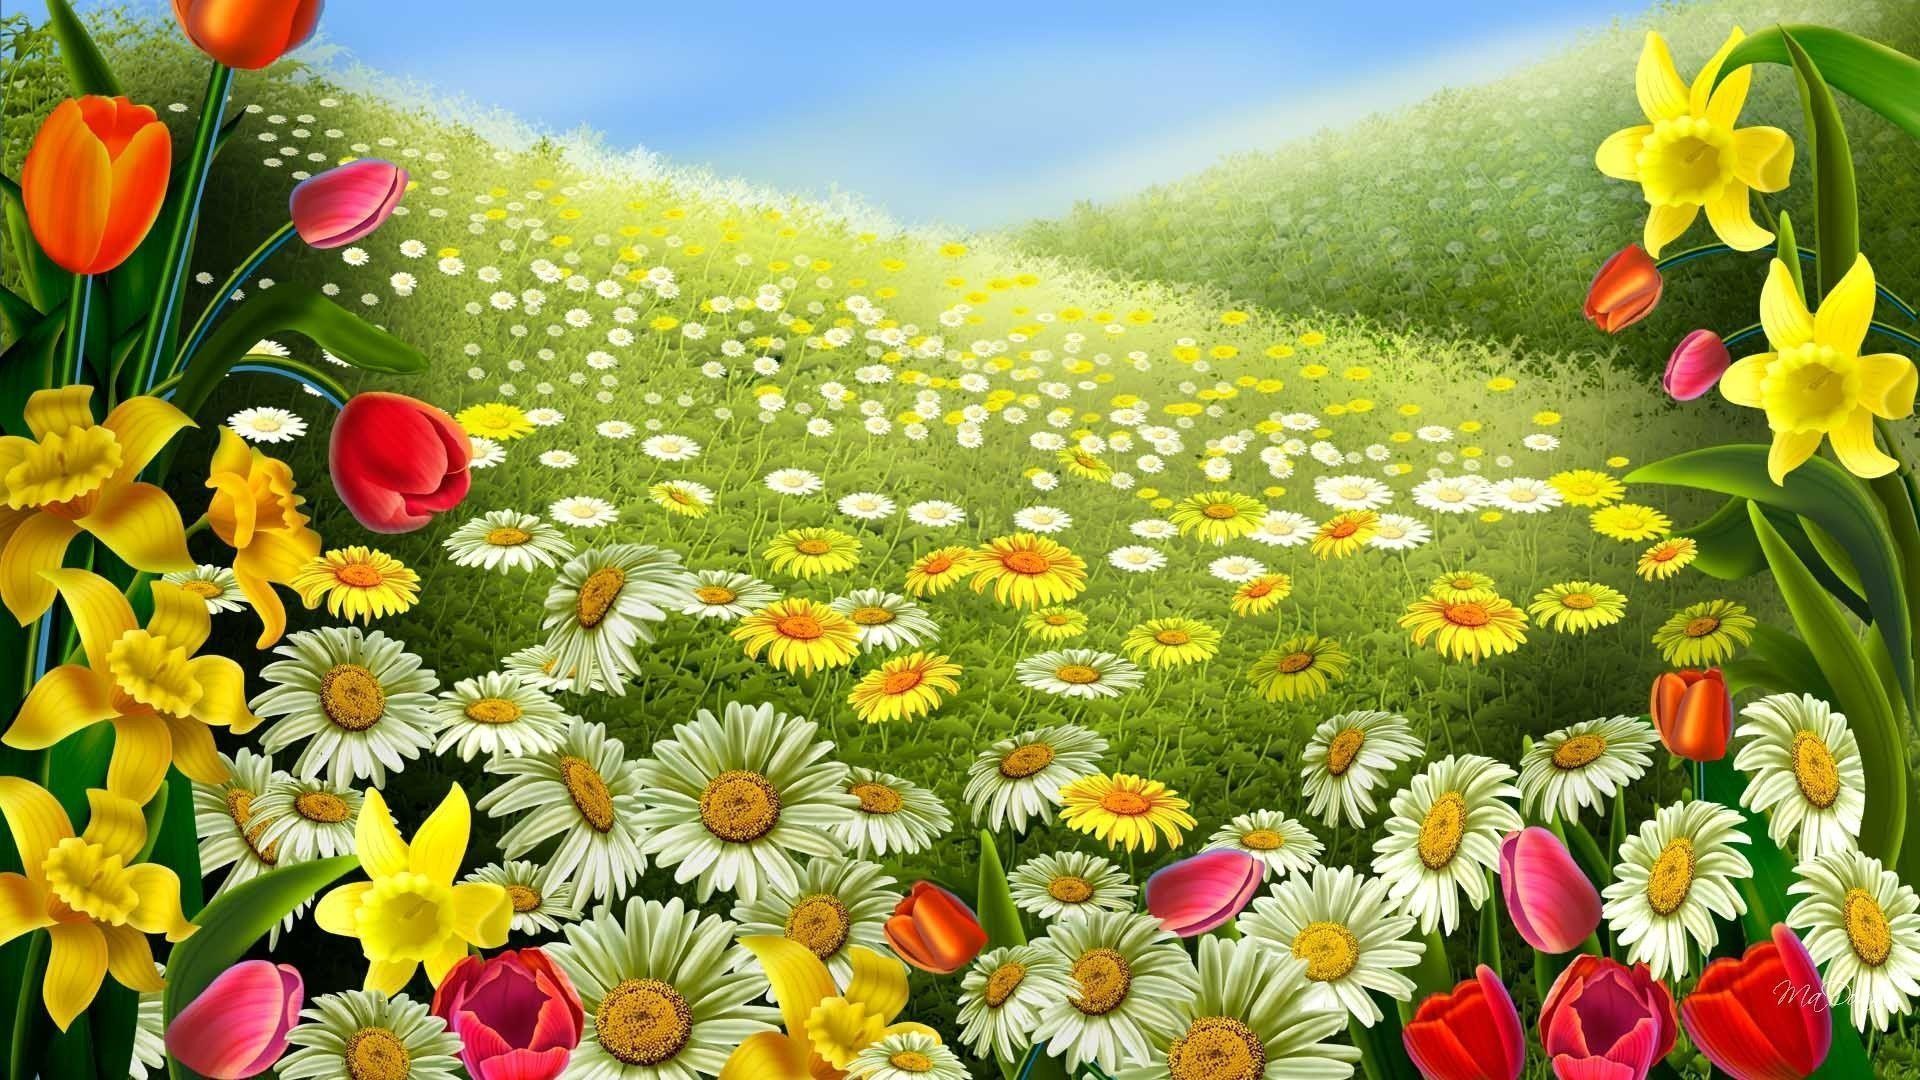 1920x1080 Desktop Backgrounds Hd Spring Wallpapers PX ~ Spring .